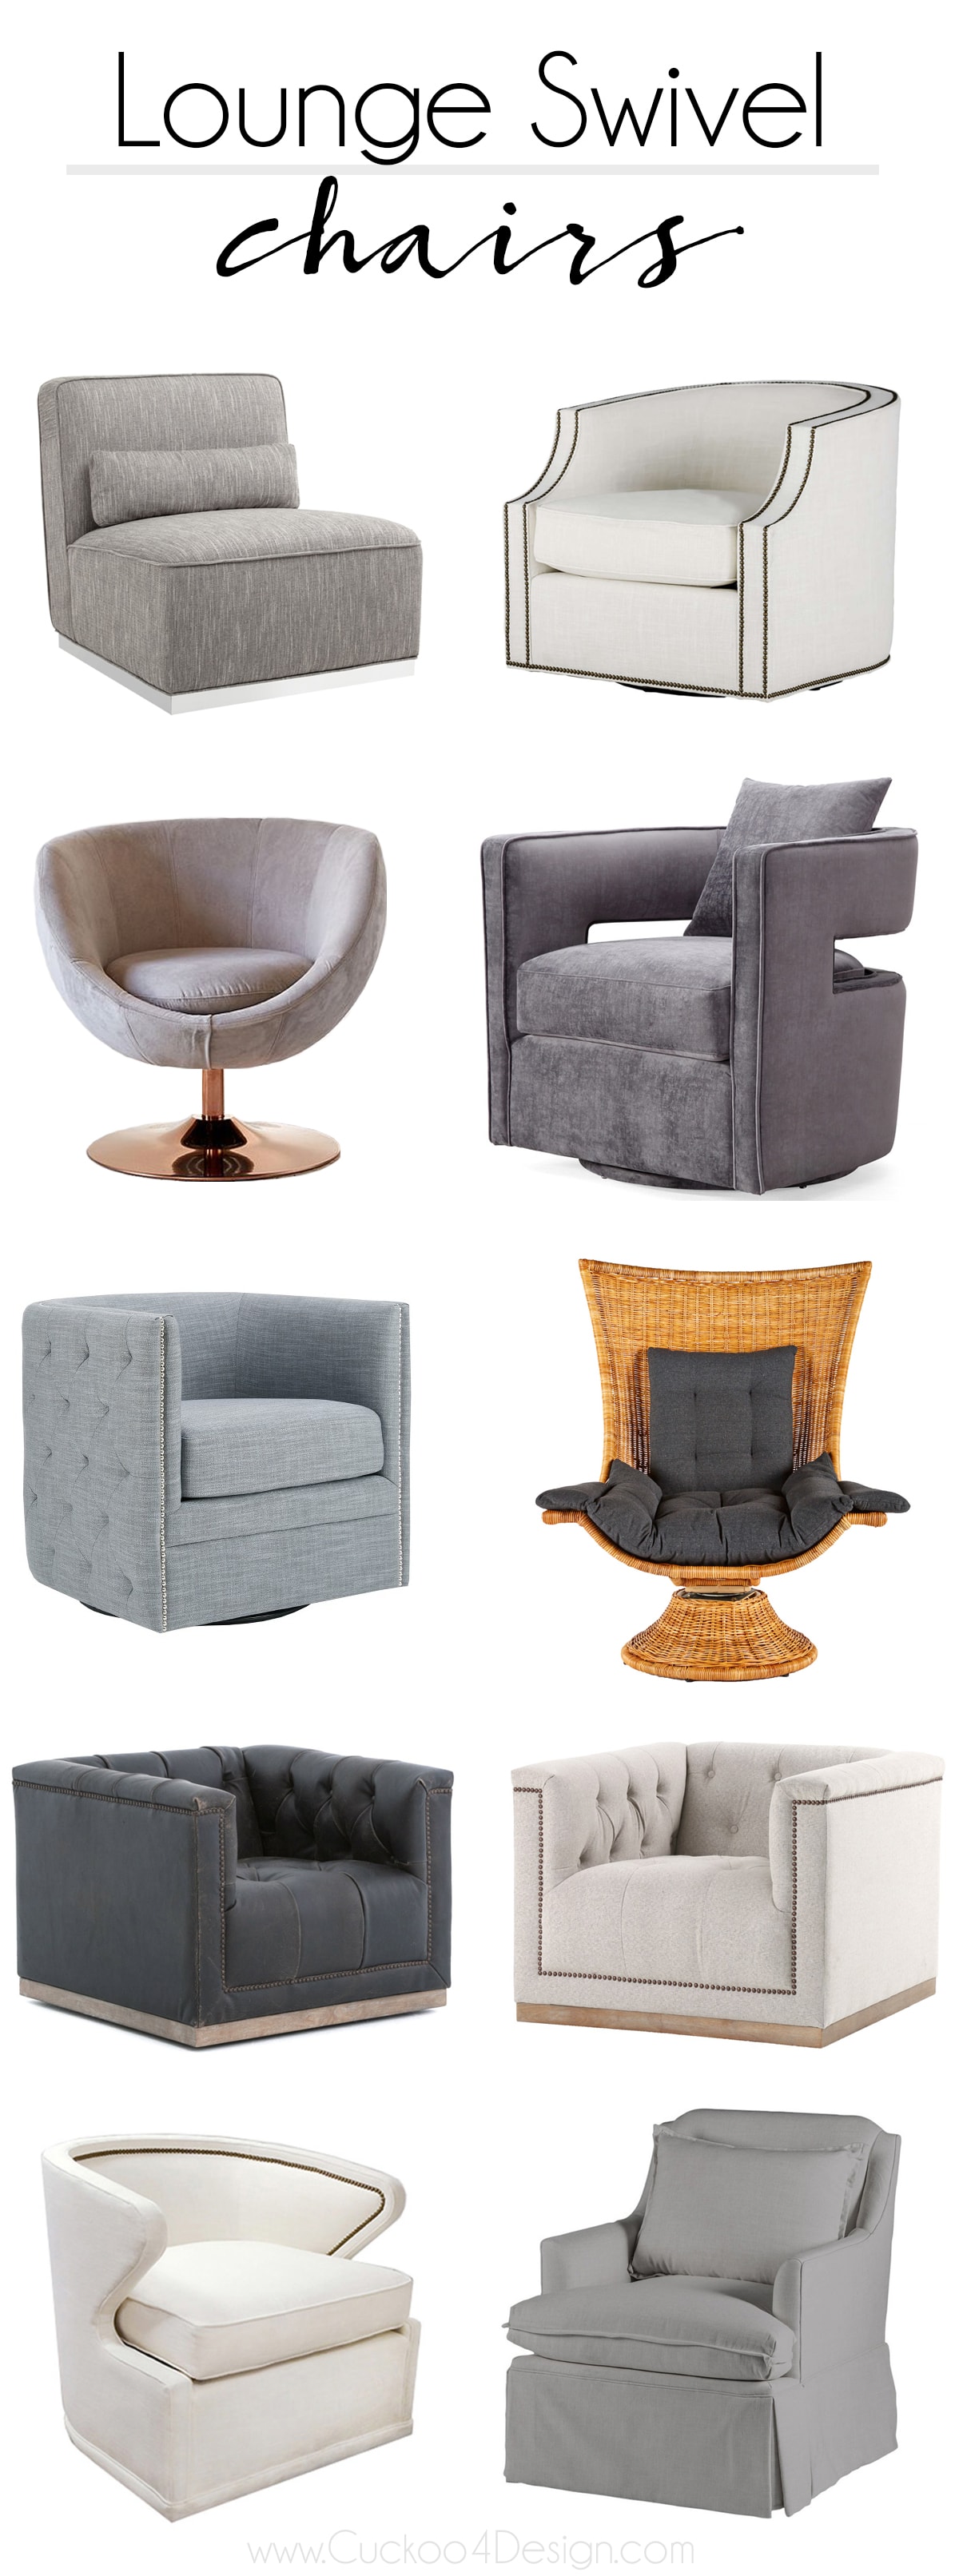 Friday Favorites: Lounge Swivel Chairs